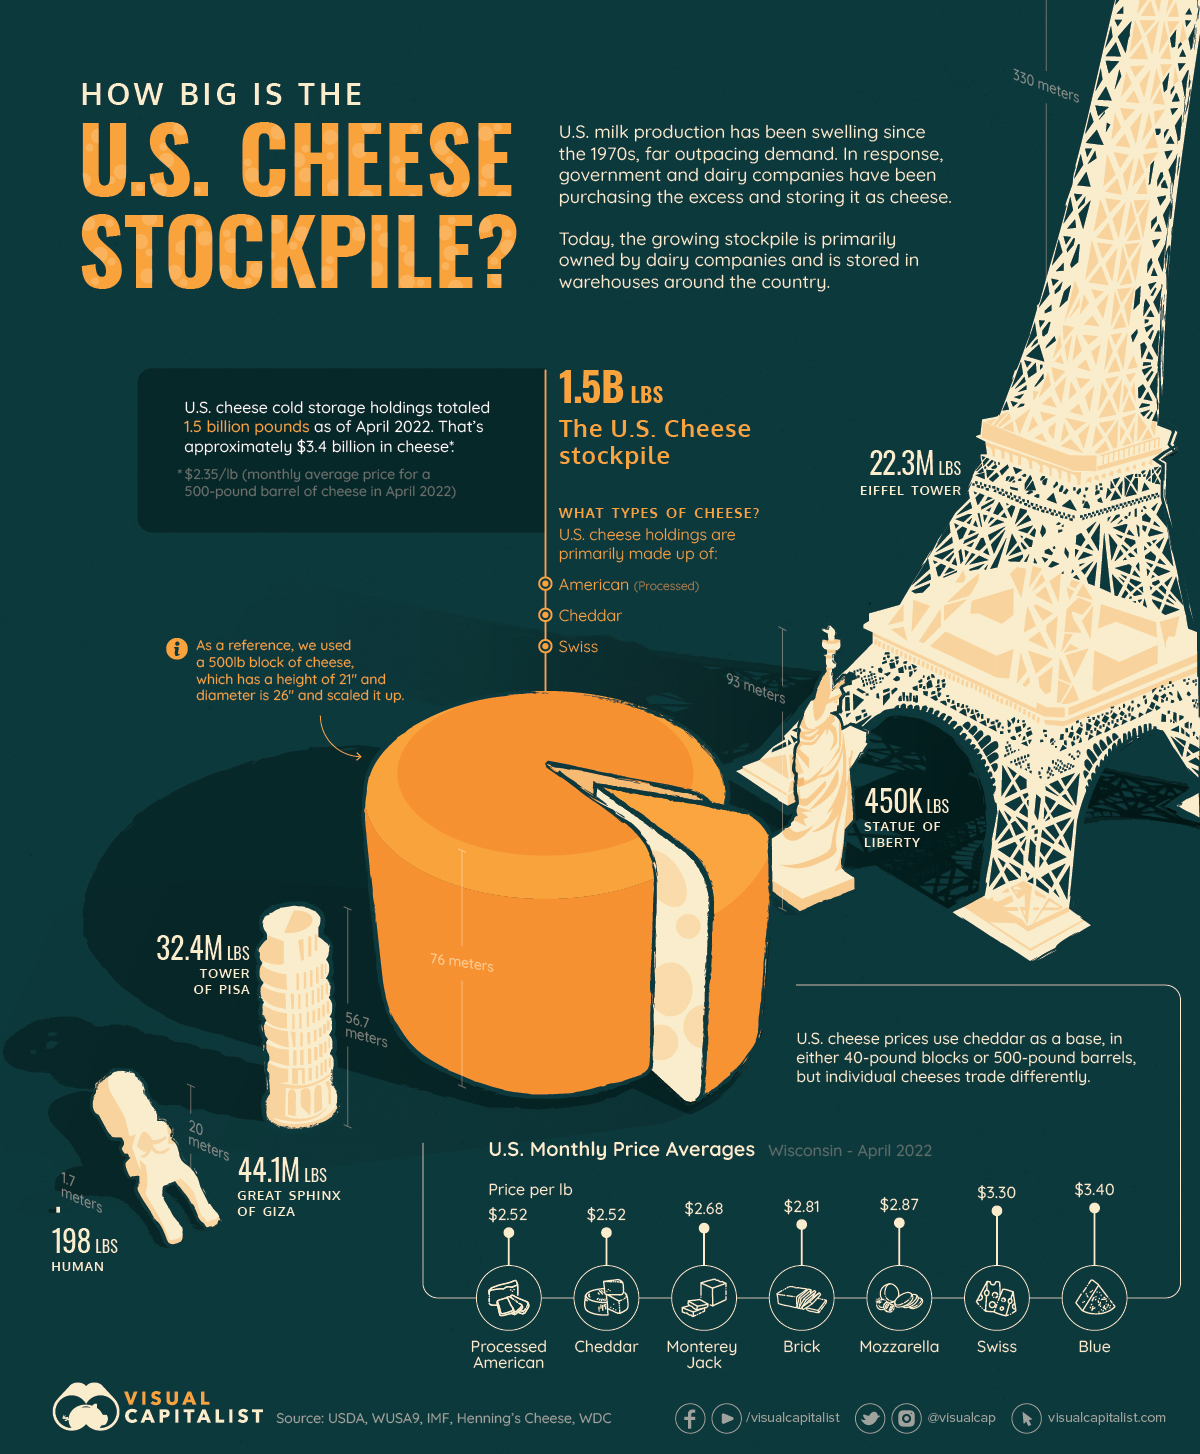 Graphic showing the amount of cheese the U.S. has stockpiled in cold storage